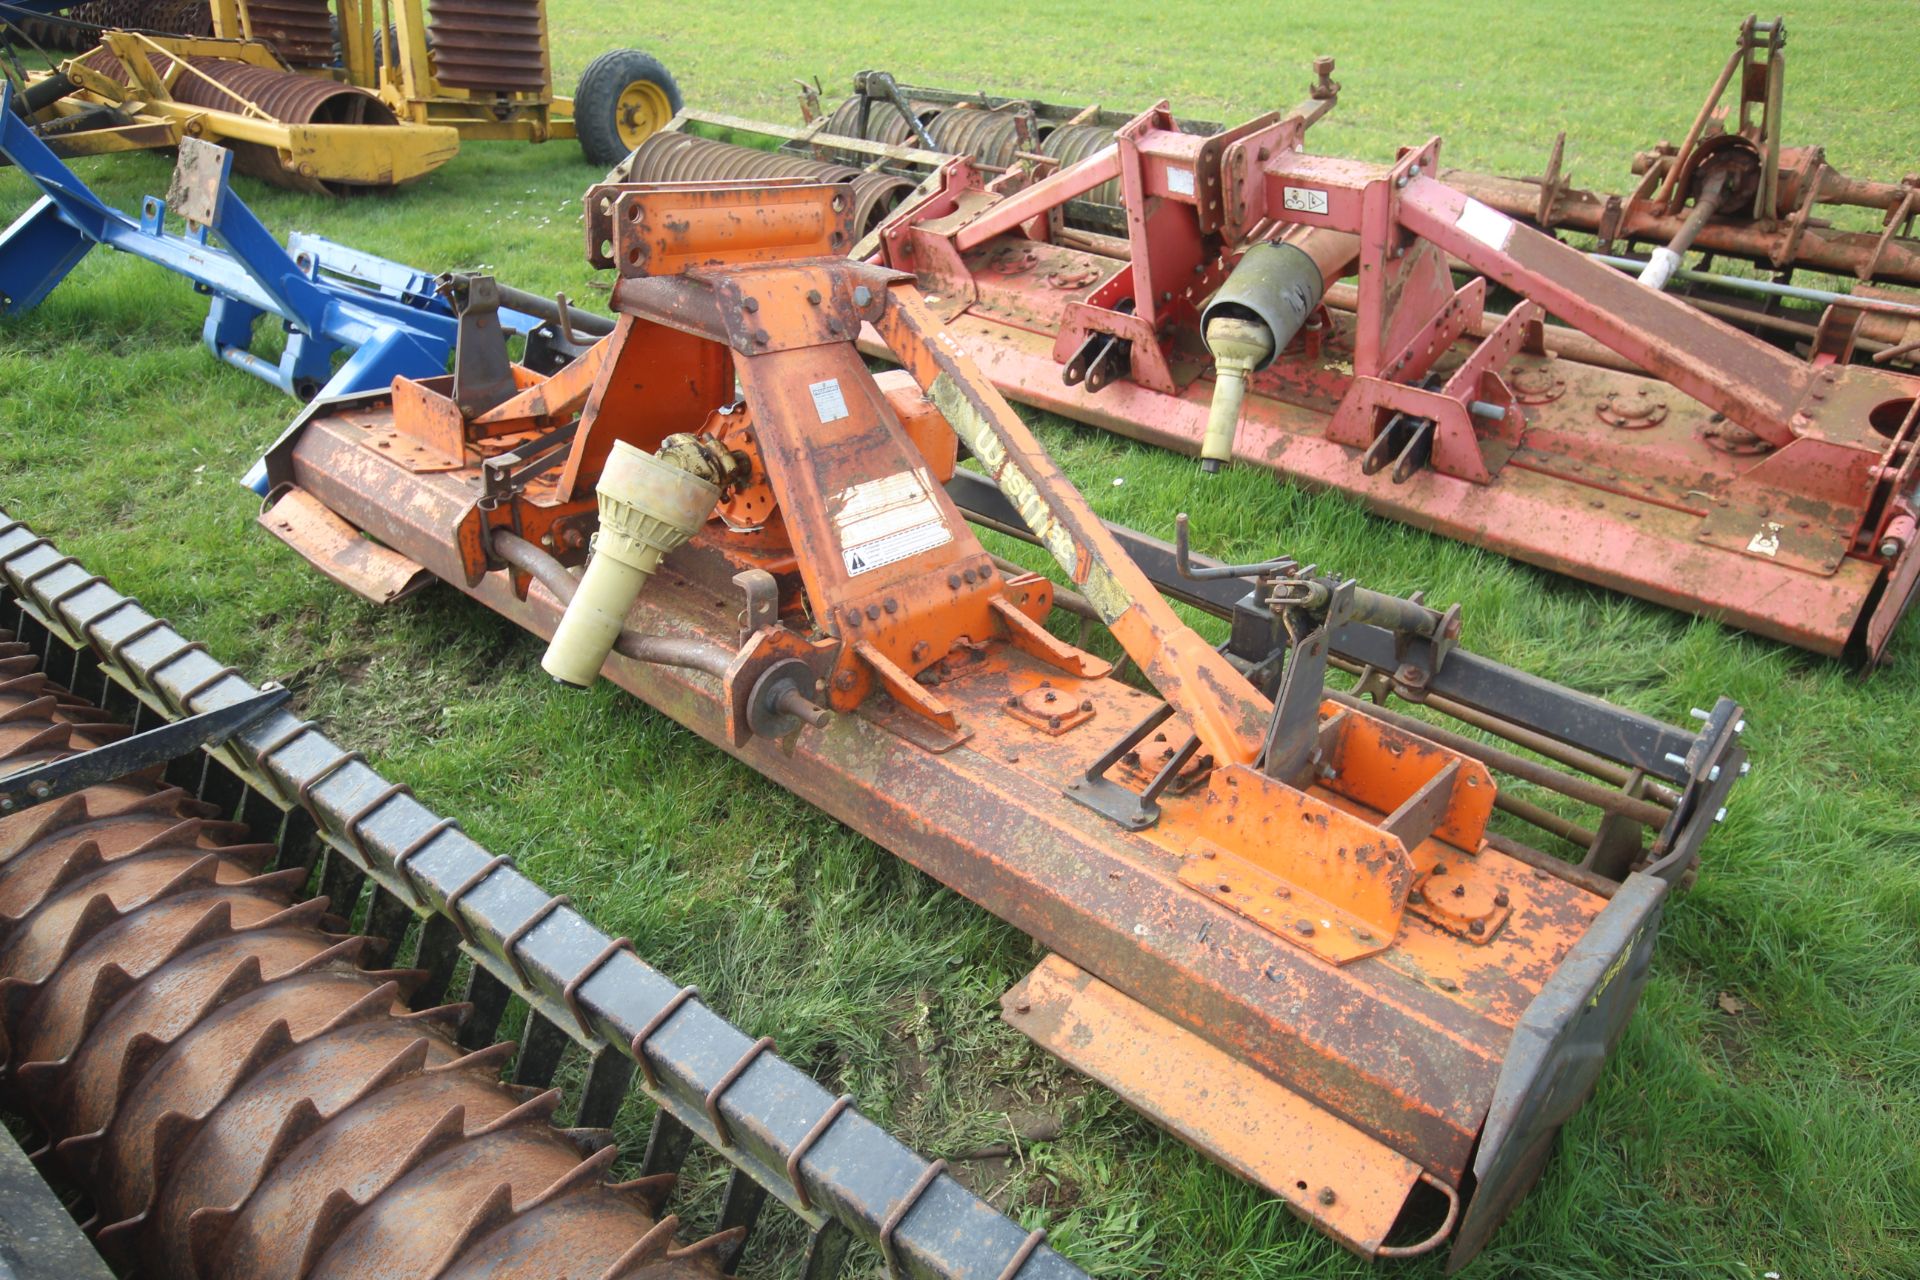 Westmac Pegararo 3m power harrow. Vendor reports owned since 2001 and used regularly. For sale due